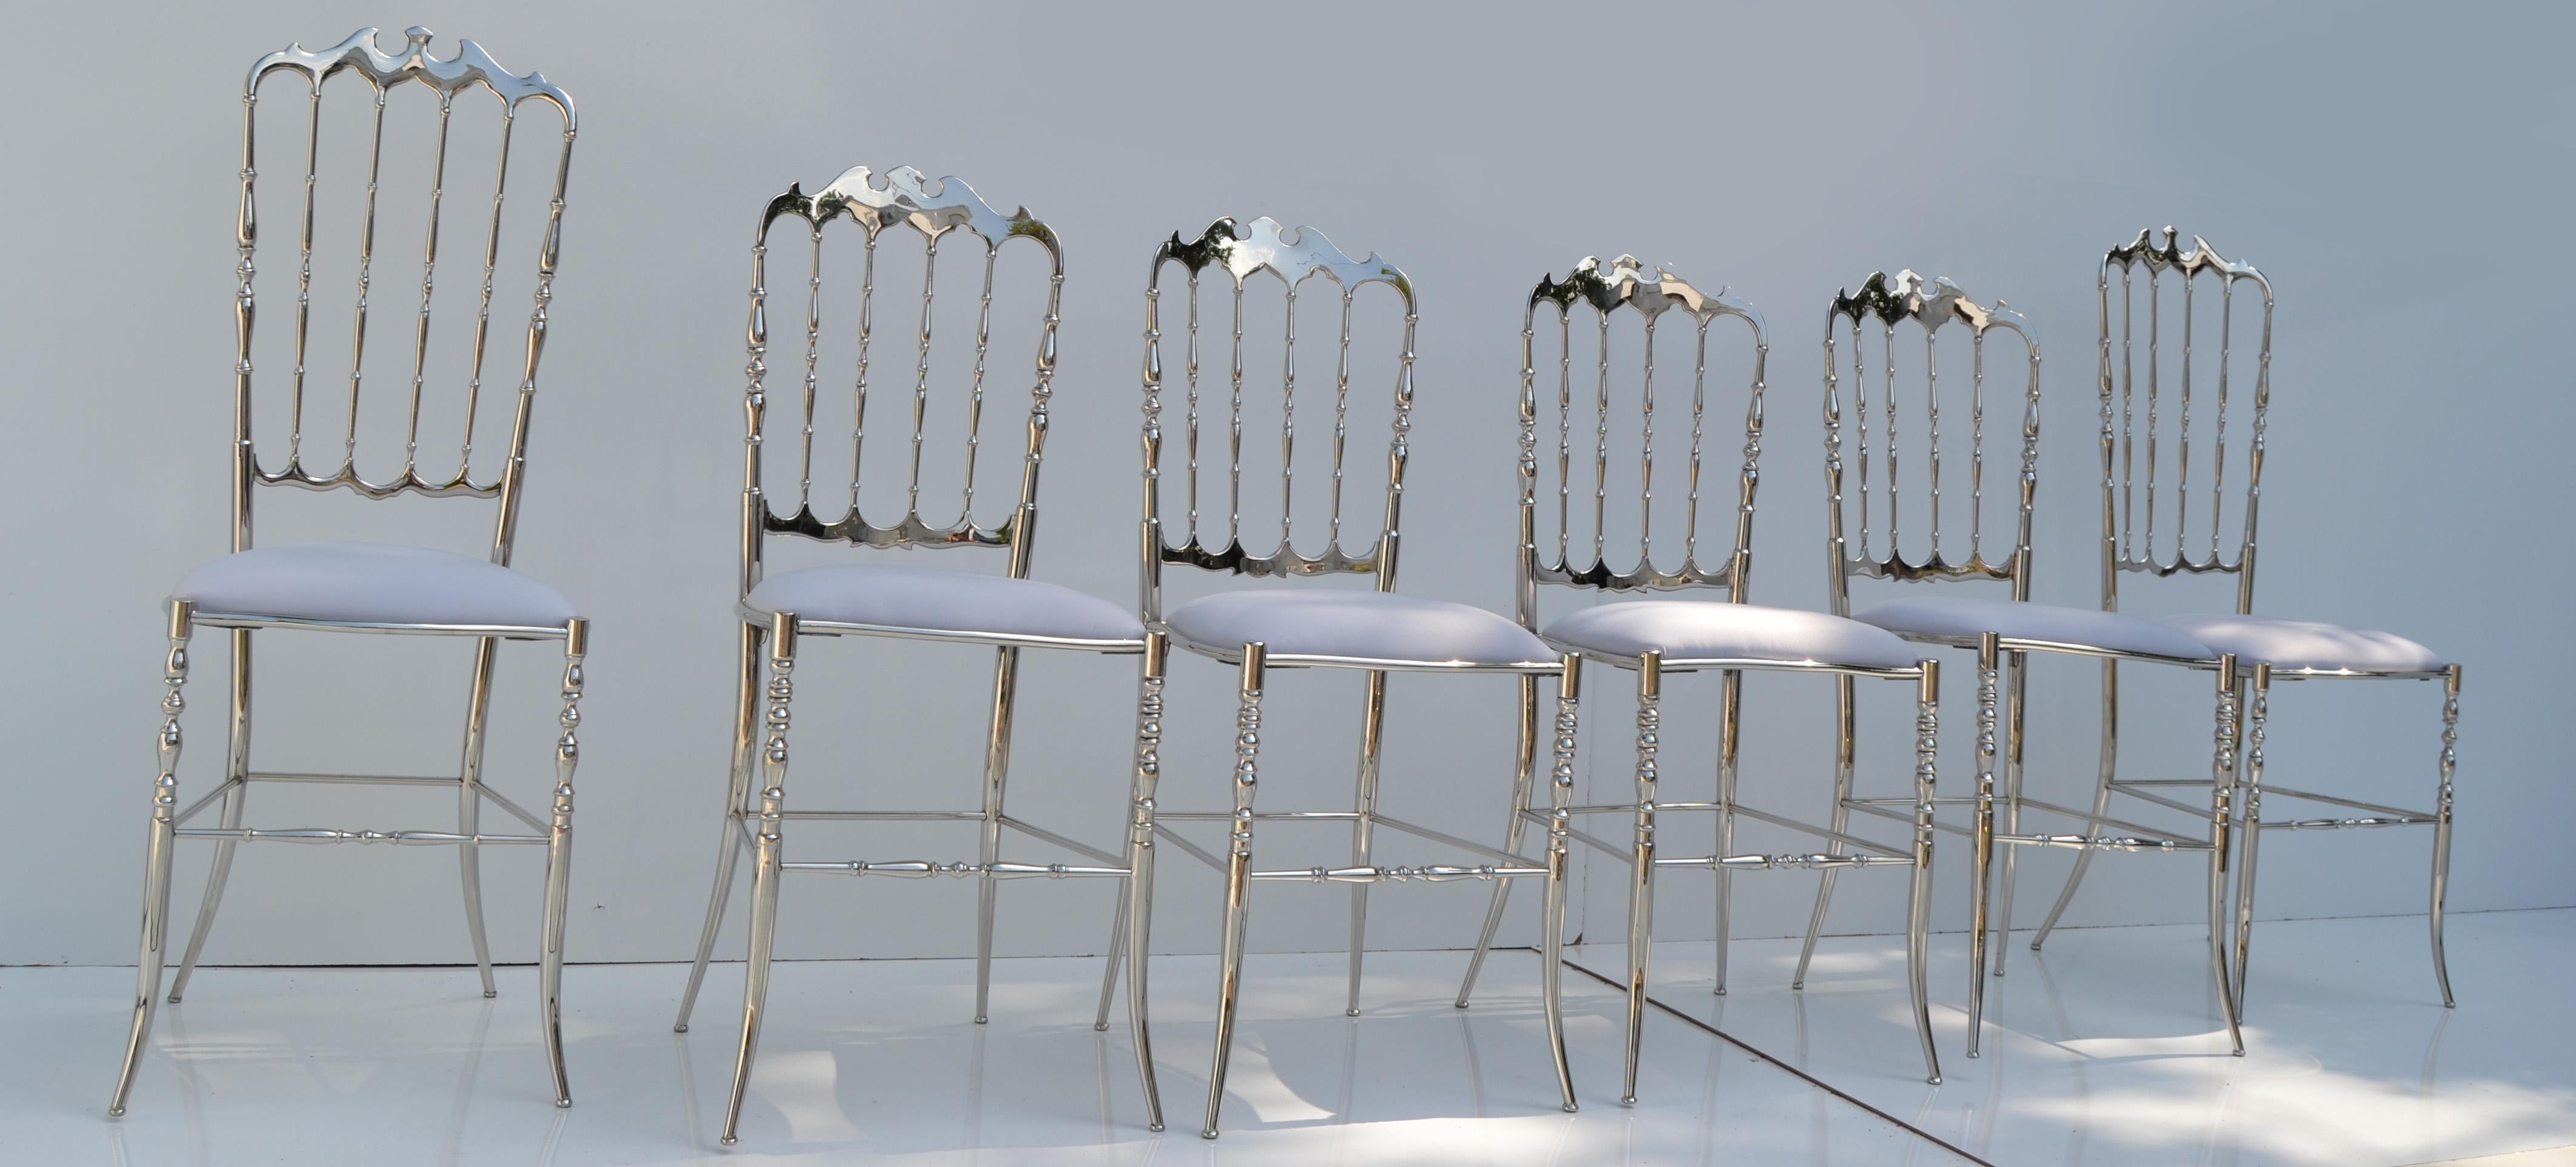 Polished Maison Baccarat Crystal Room Restaurant Style Set of 6 Nickel Plated Chair